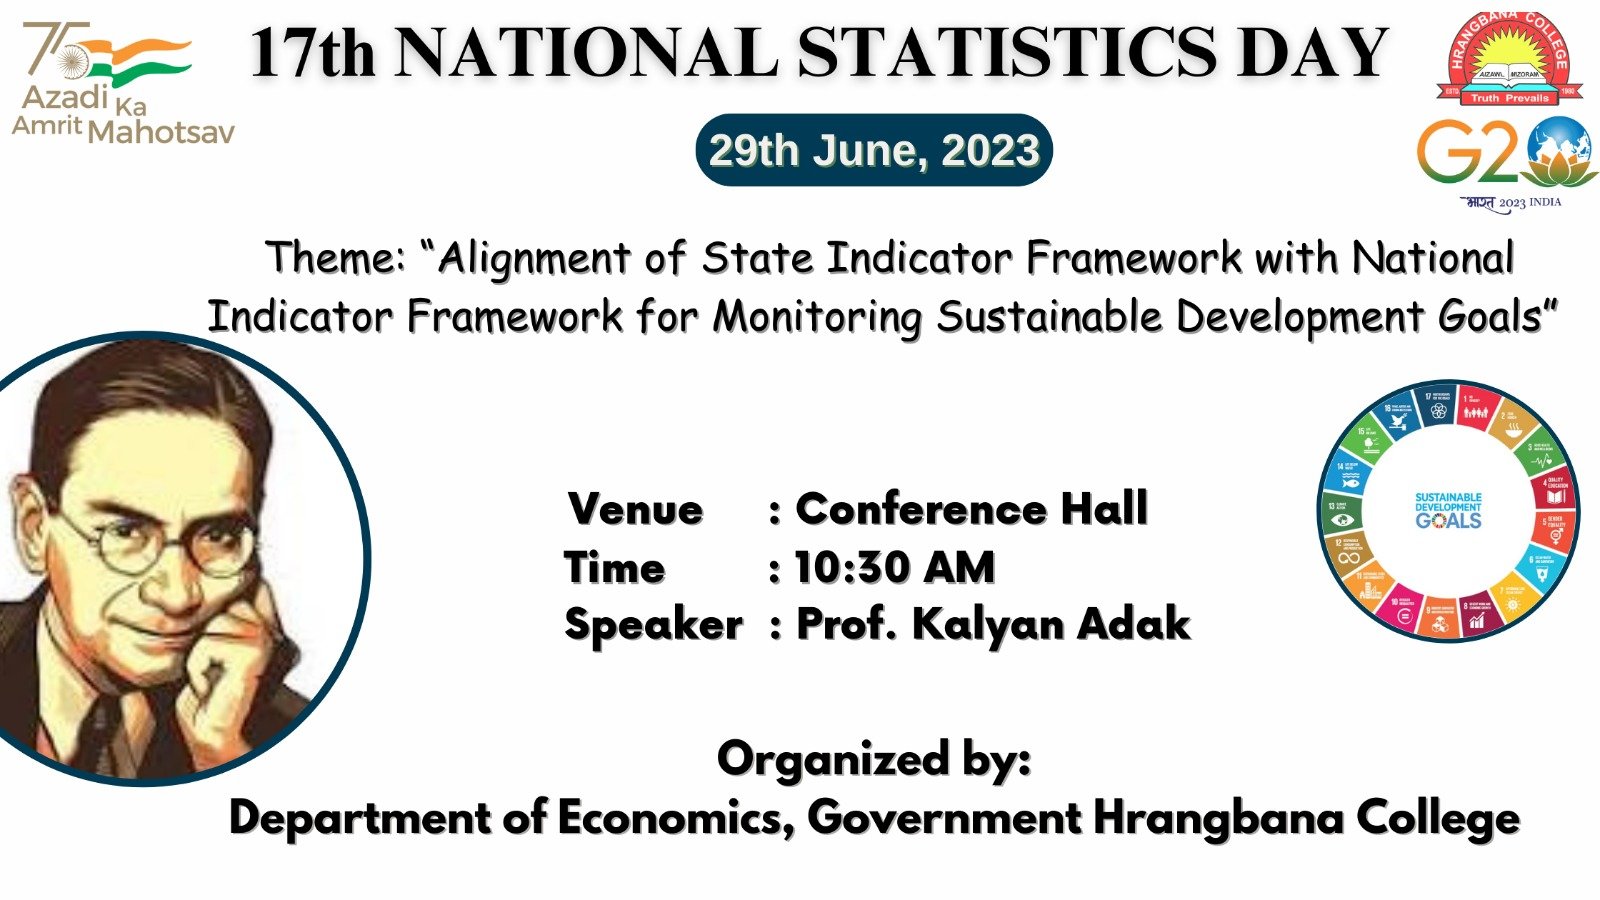 17th National Statistics Day